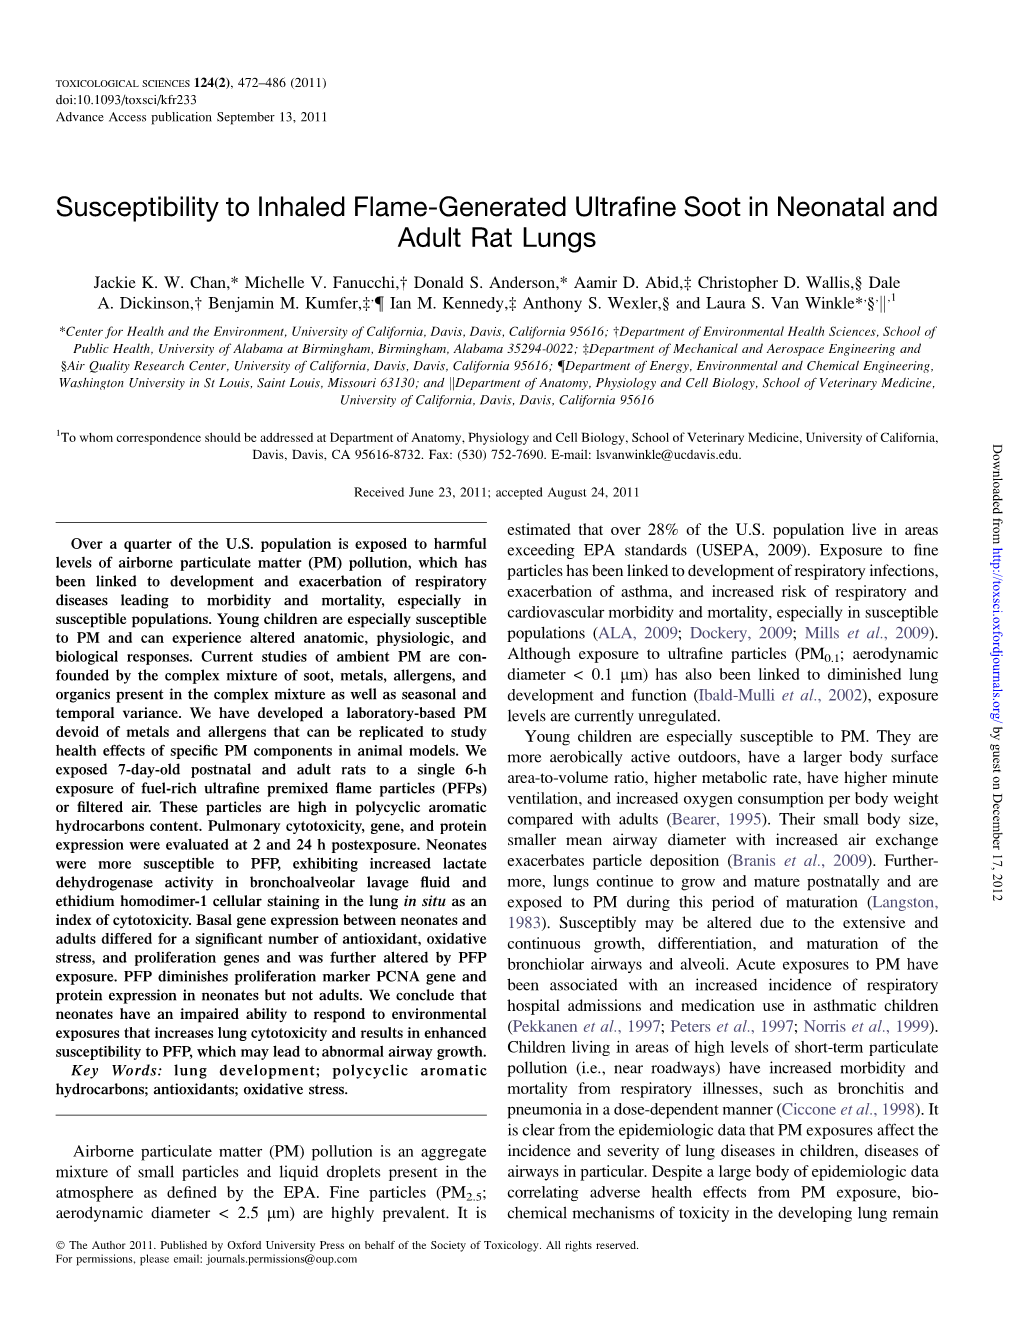 Susceptibility to Inhaled Flame-Generated Ultrafine Soot In